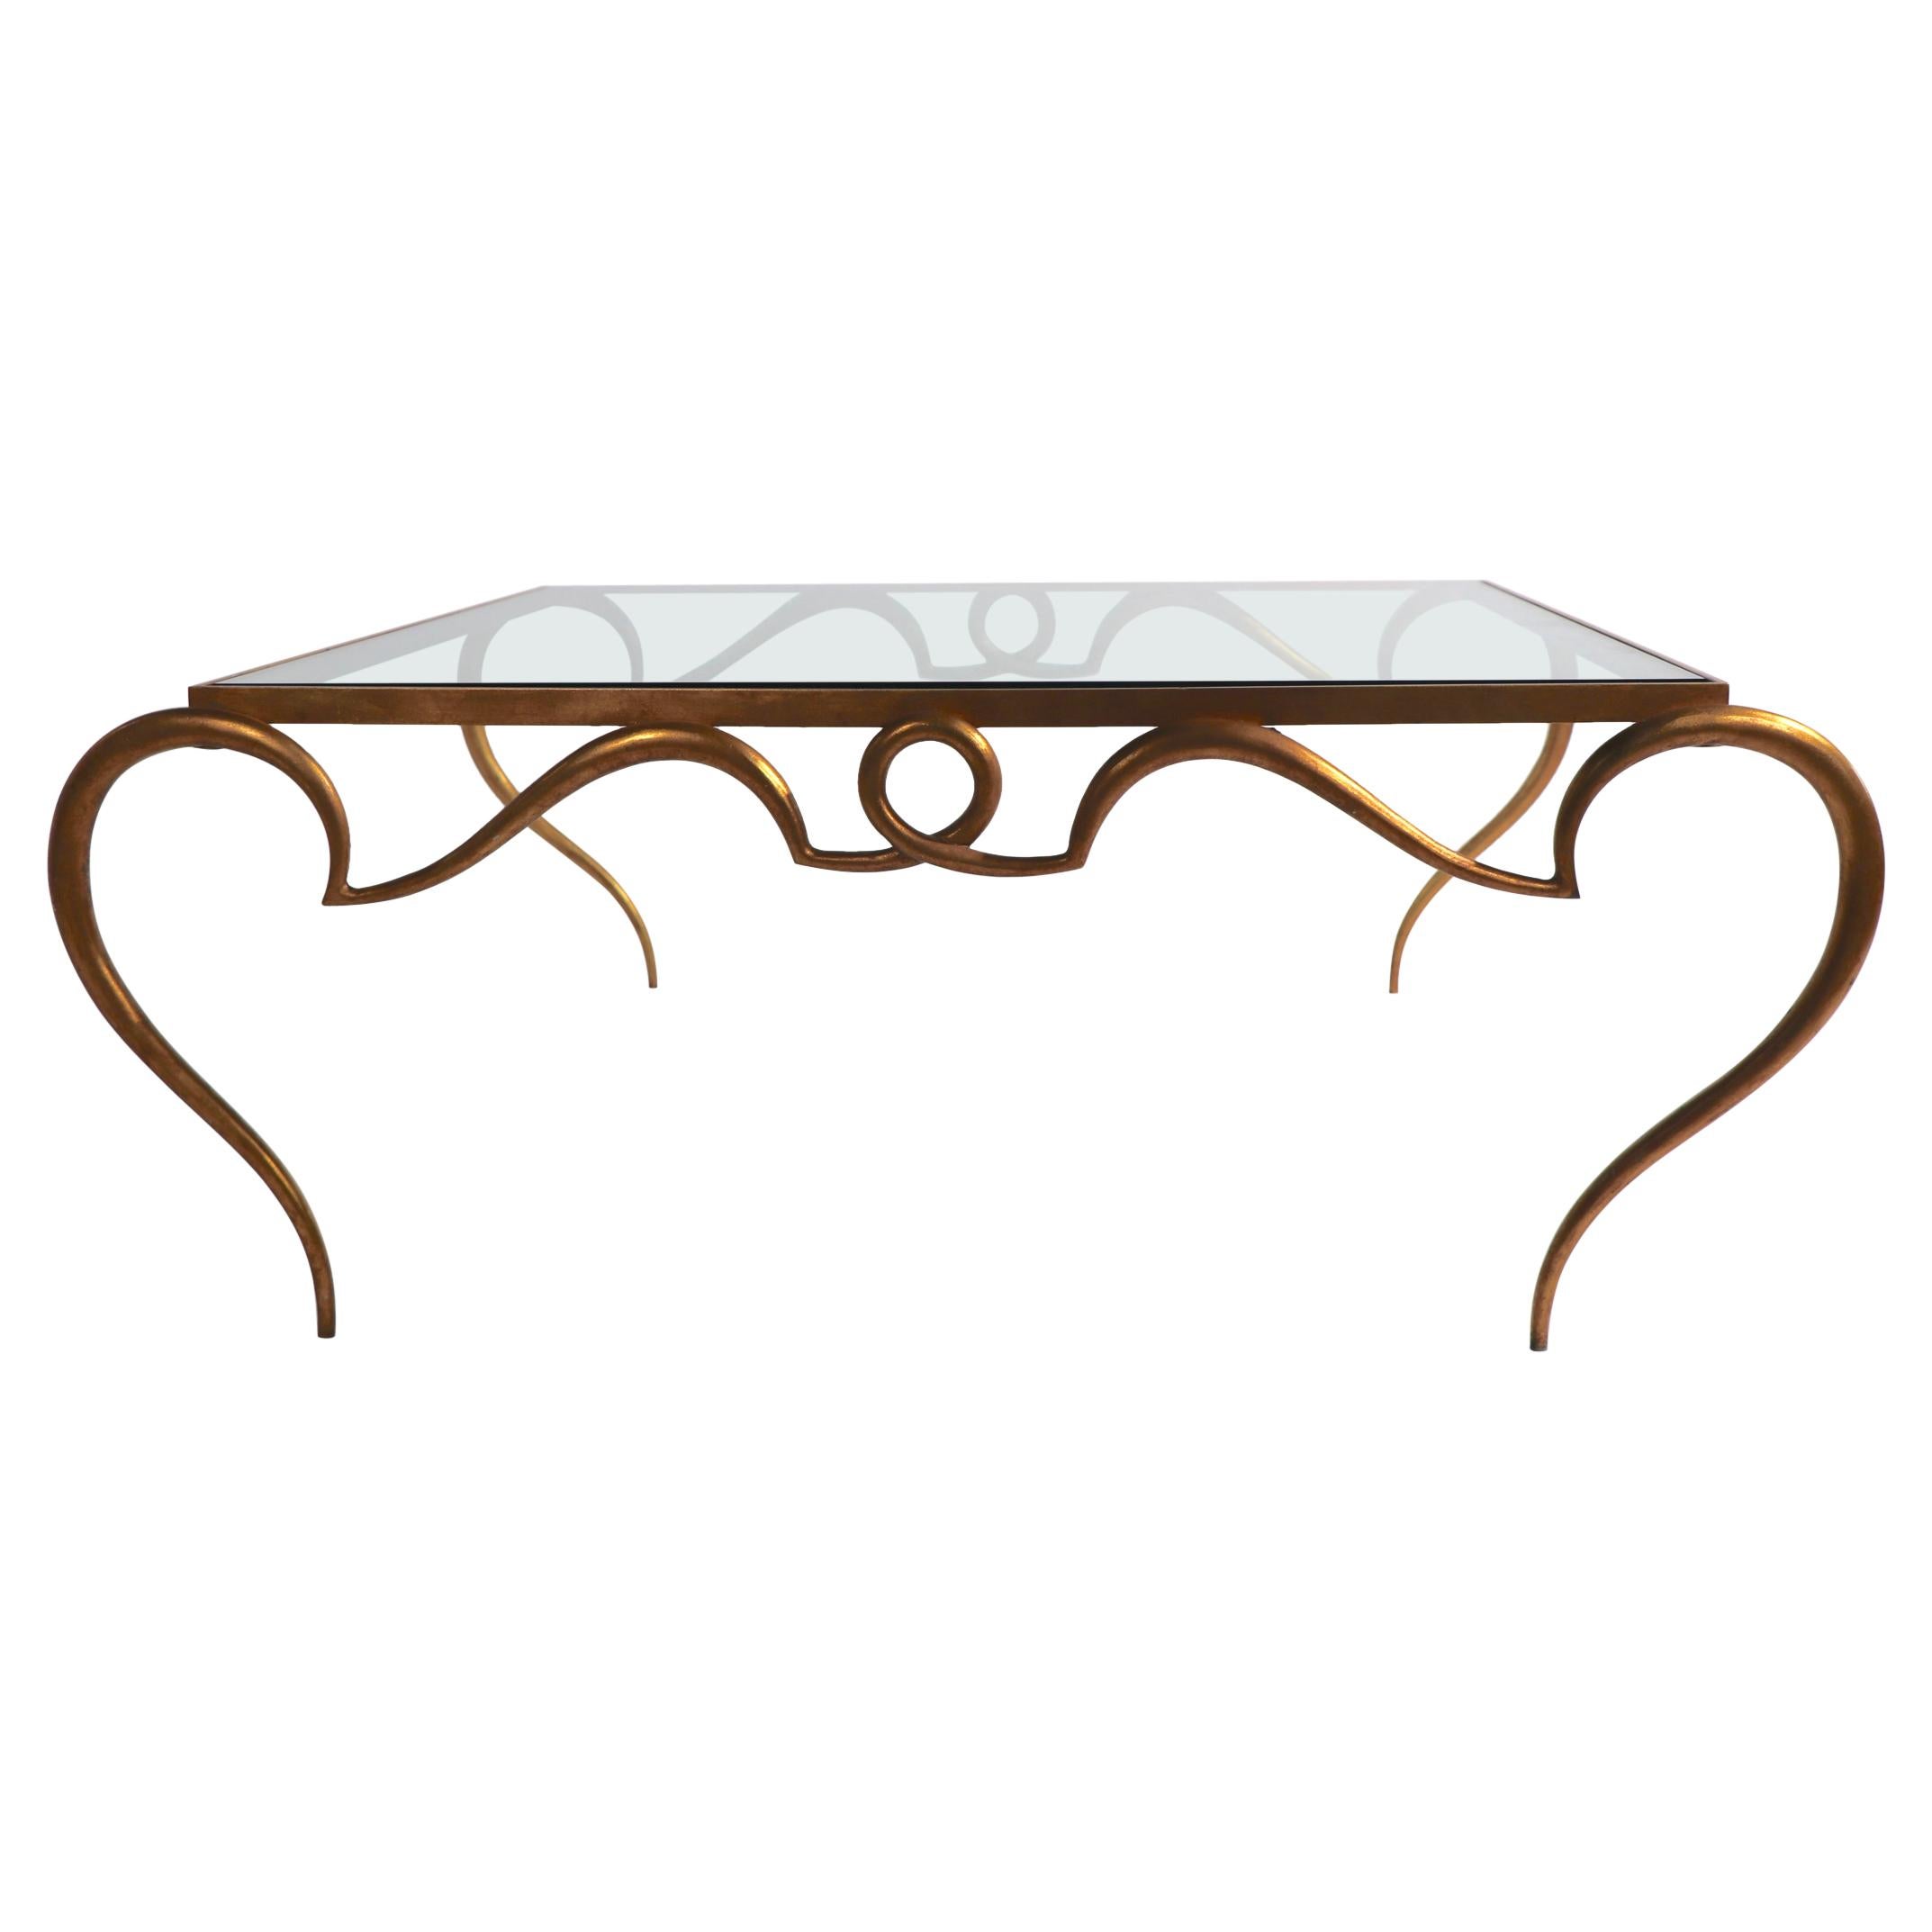 Faux Gilt Metal Scrollwork and Glass Coffee Table att. to Rene Drouet